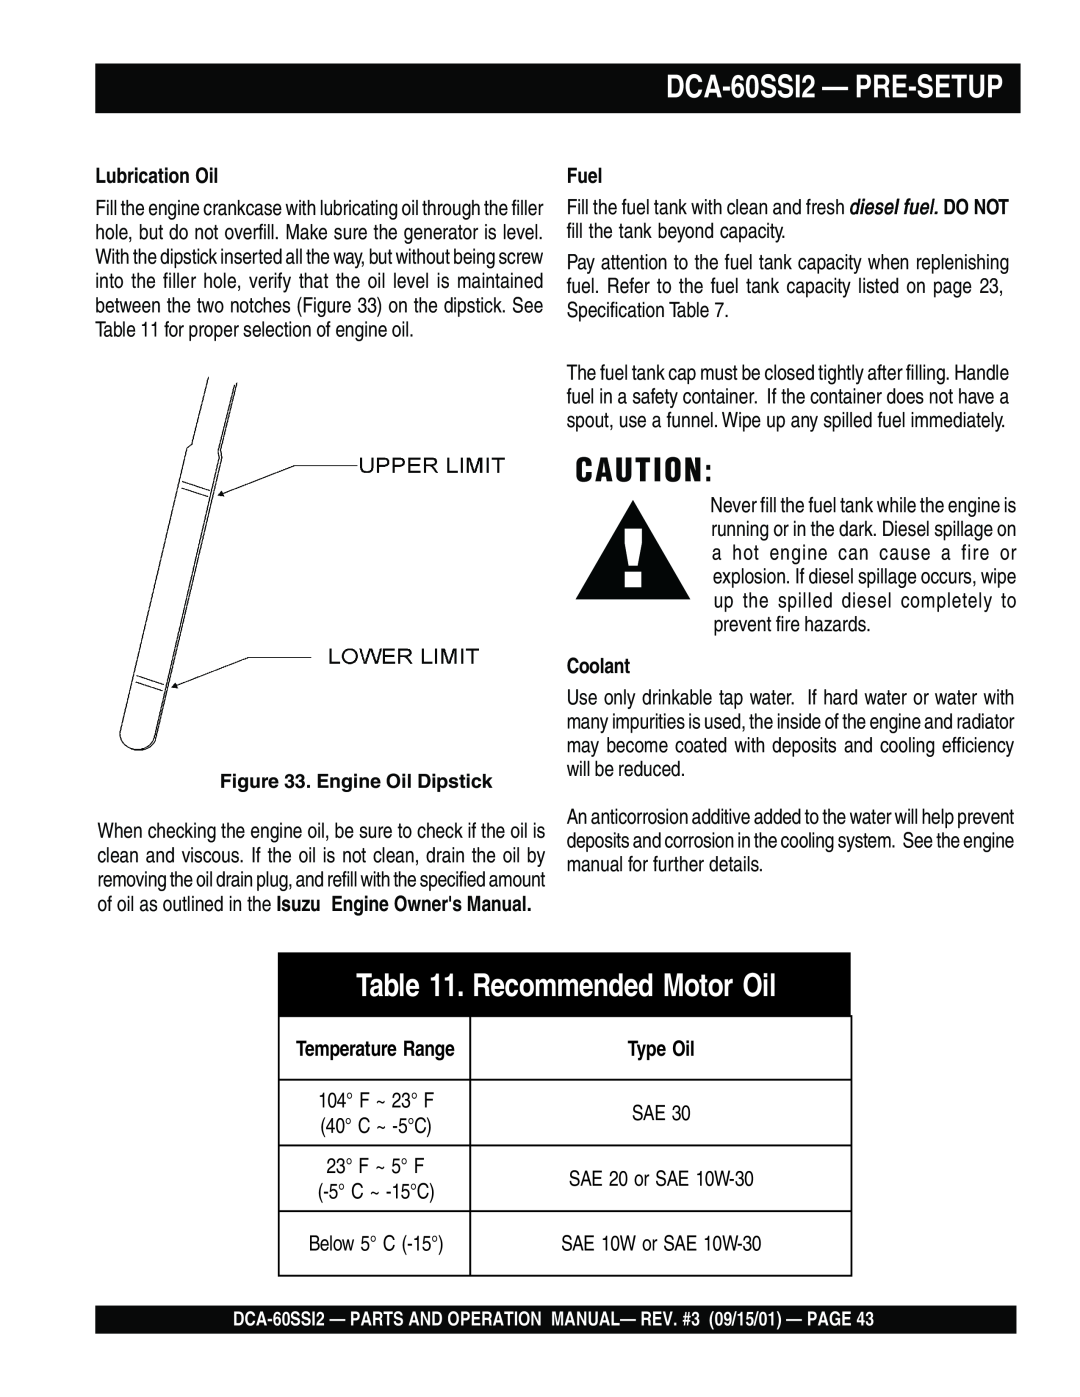 Multiquip DCA-60SS12 operation manual Recommended Motor Oil, DCA-60SSI2— PRE-SETUP, Lubrication Oil, Coolant 